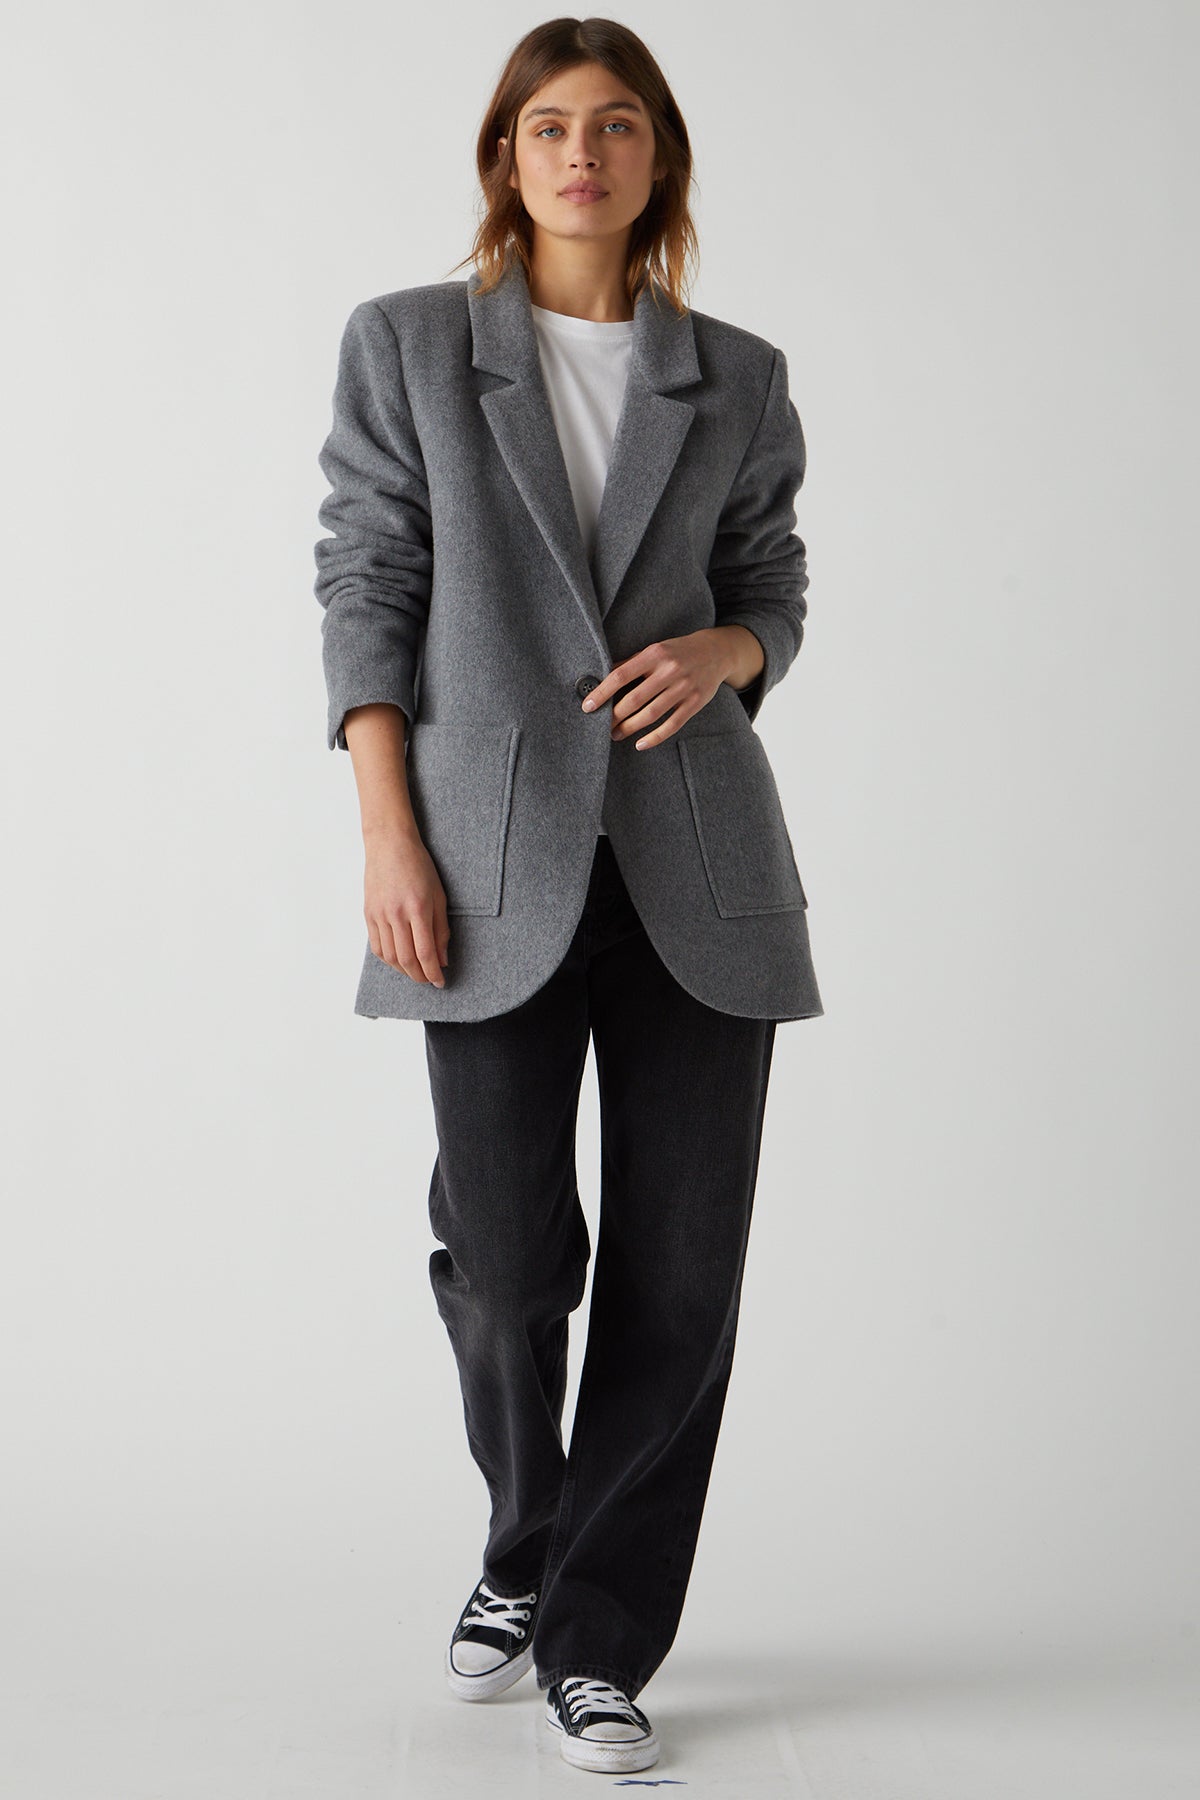   The model is wearing an ALAMOS blazer and black jeans. (brand: Velvet by Jenny Graham) 